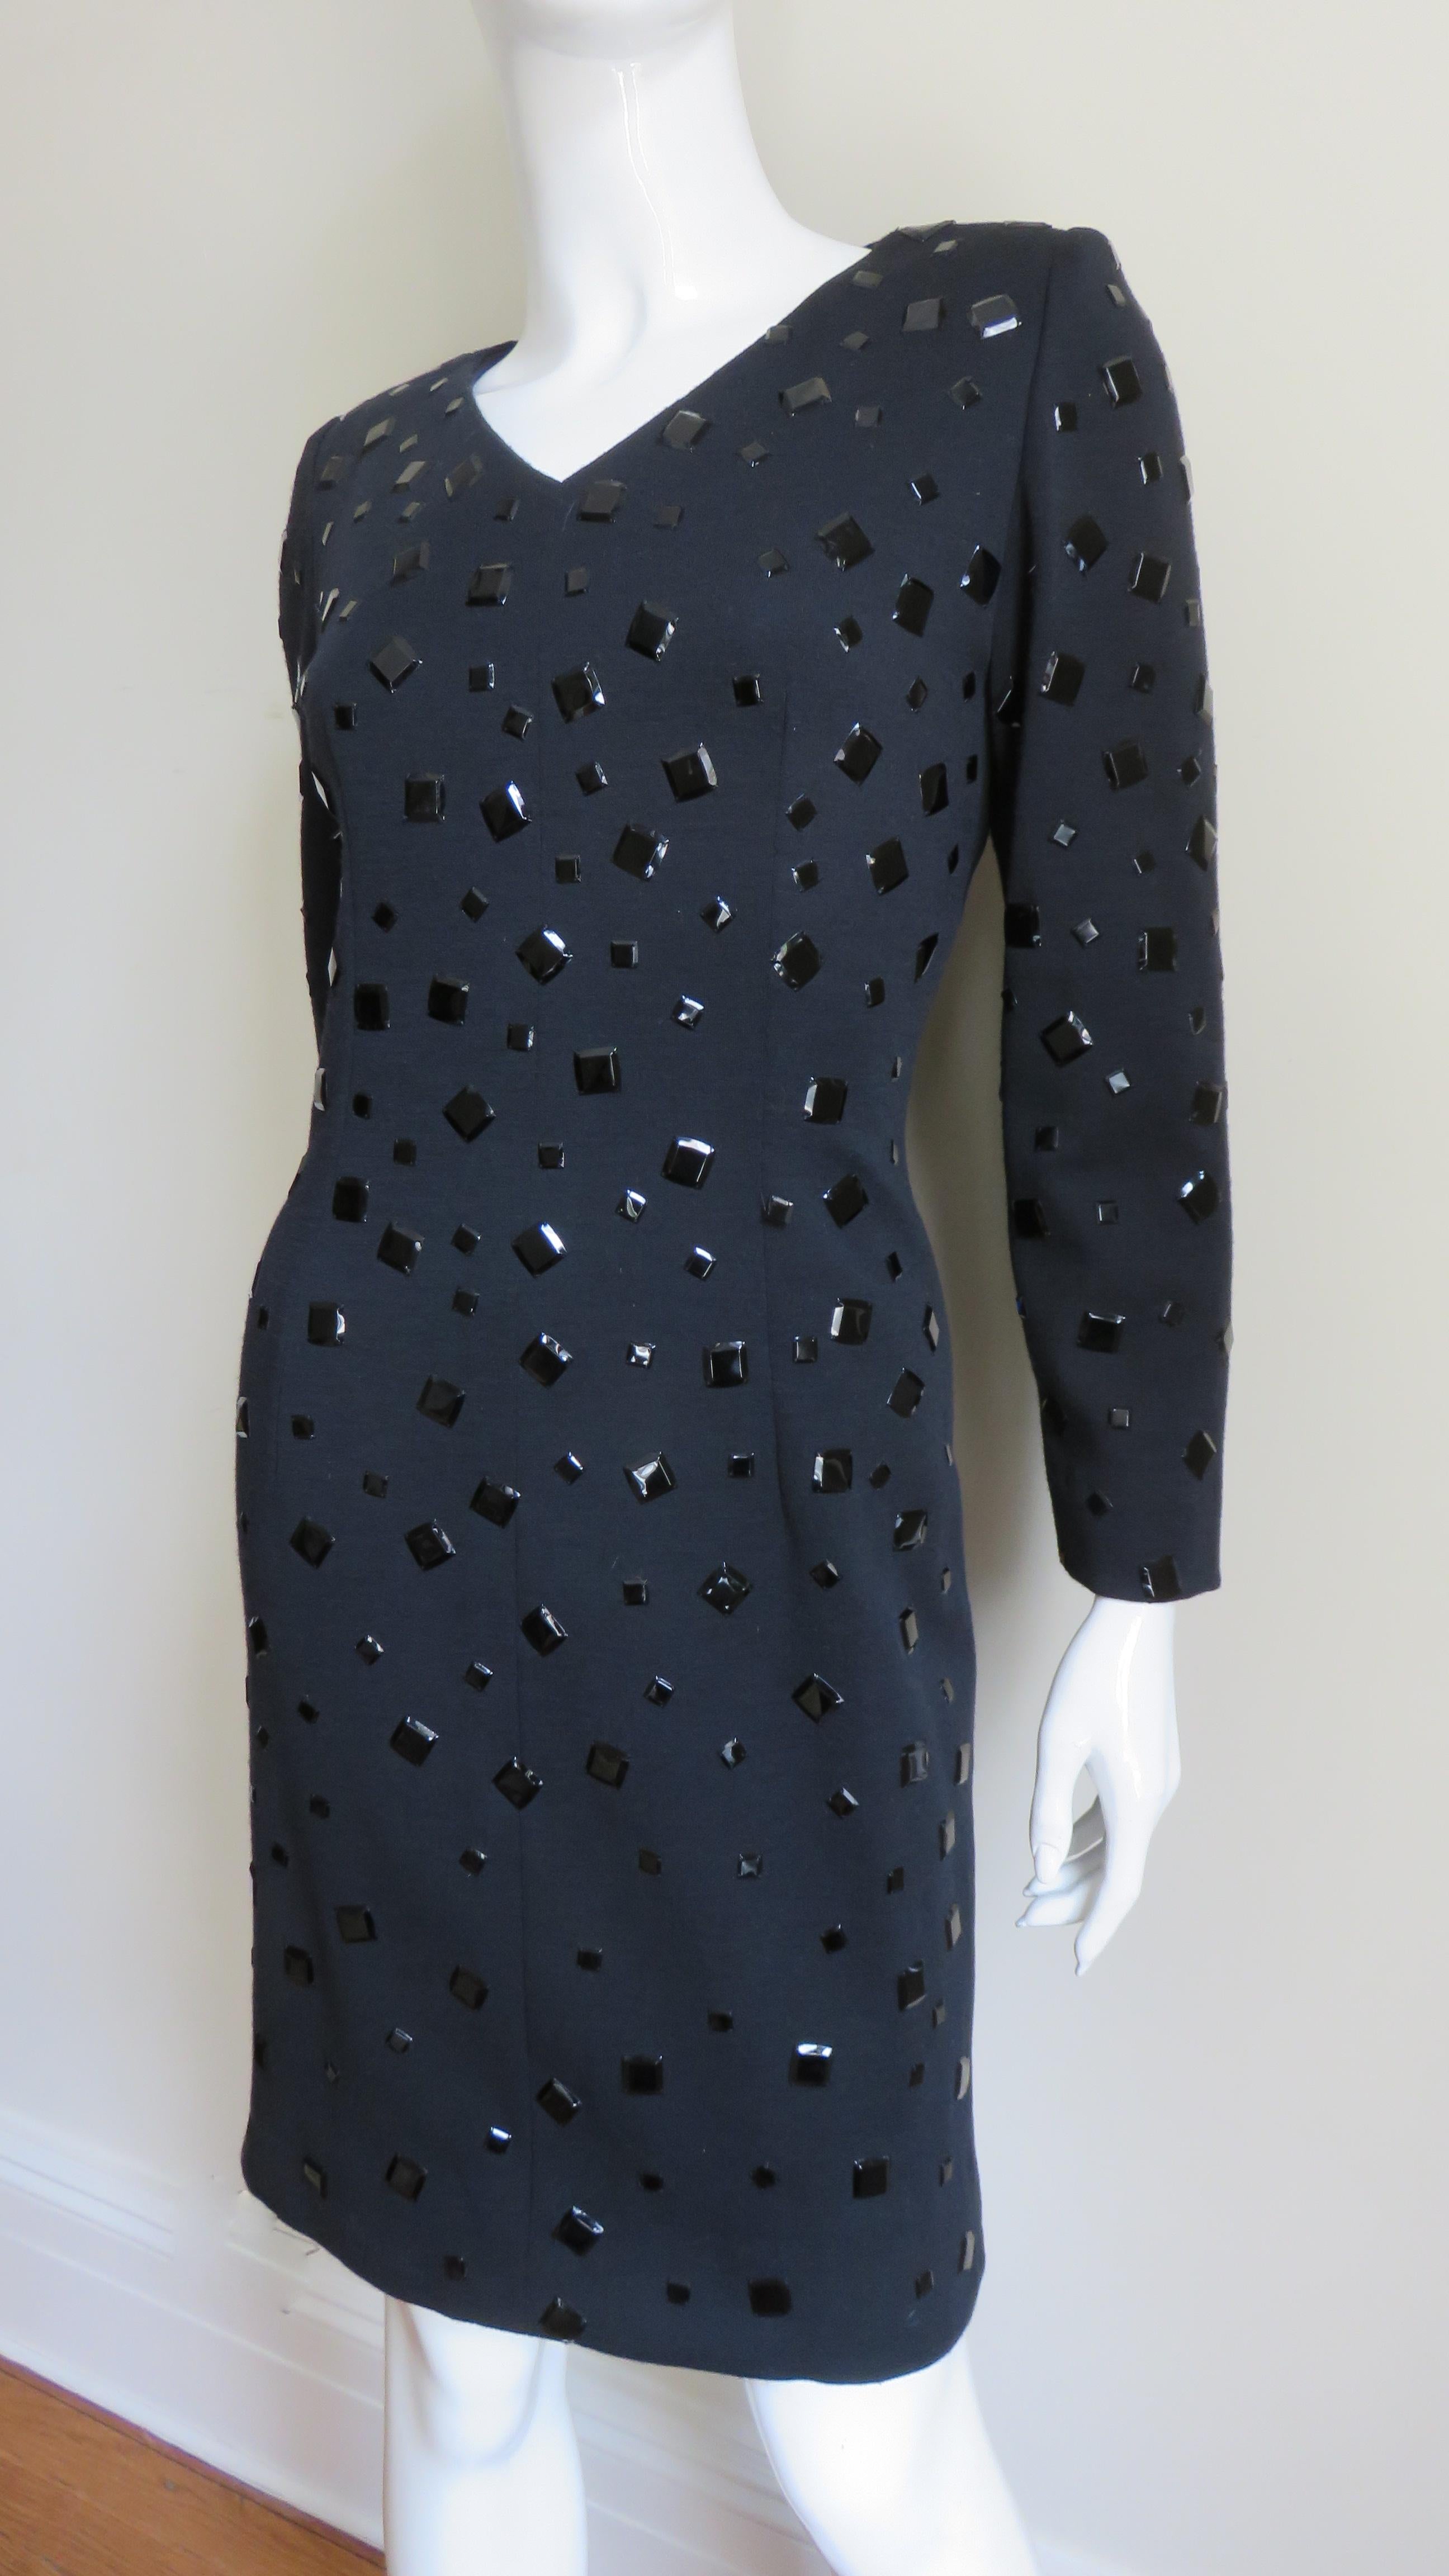 A fabulous wool jersey dress by Givenchy.  It is semi fitted with a small V neckline, long sleeves and lightly padded shoulders. The entire dress is covered in shiny black metal squares of varying sizes.  It is lined in black silk and has a hand